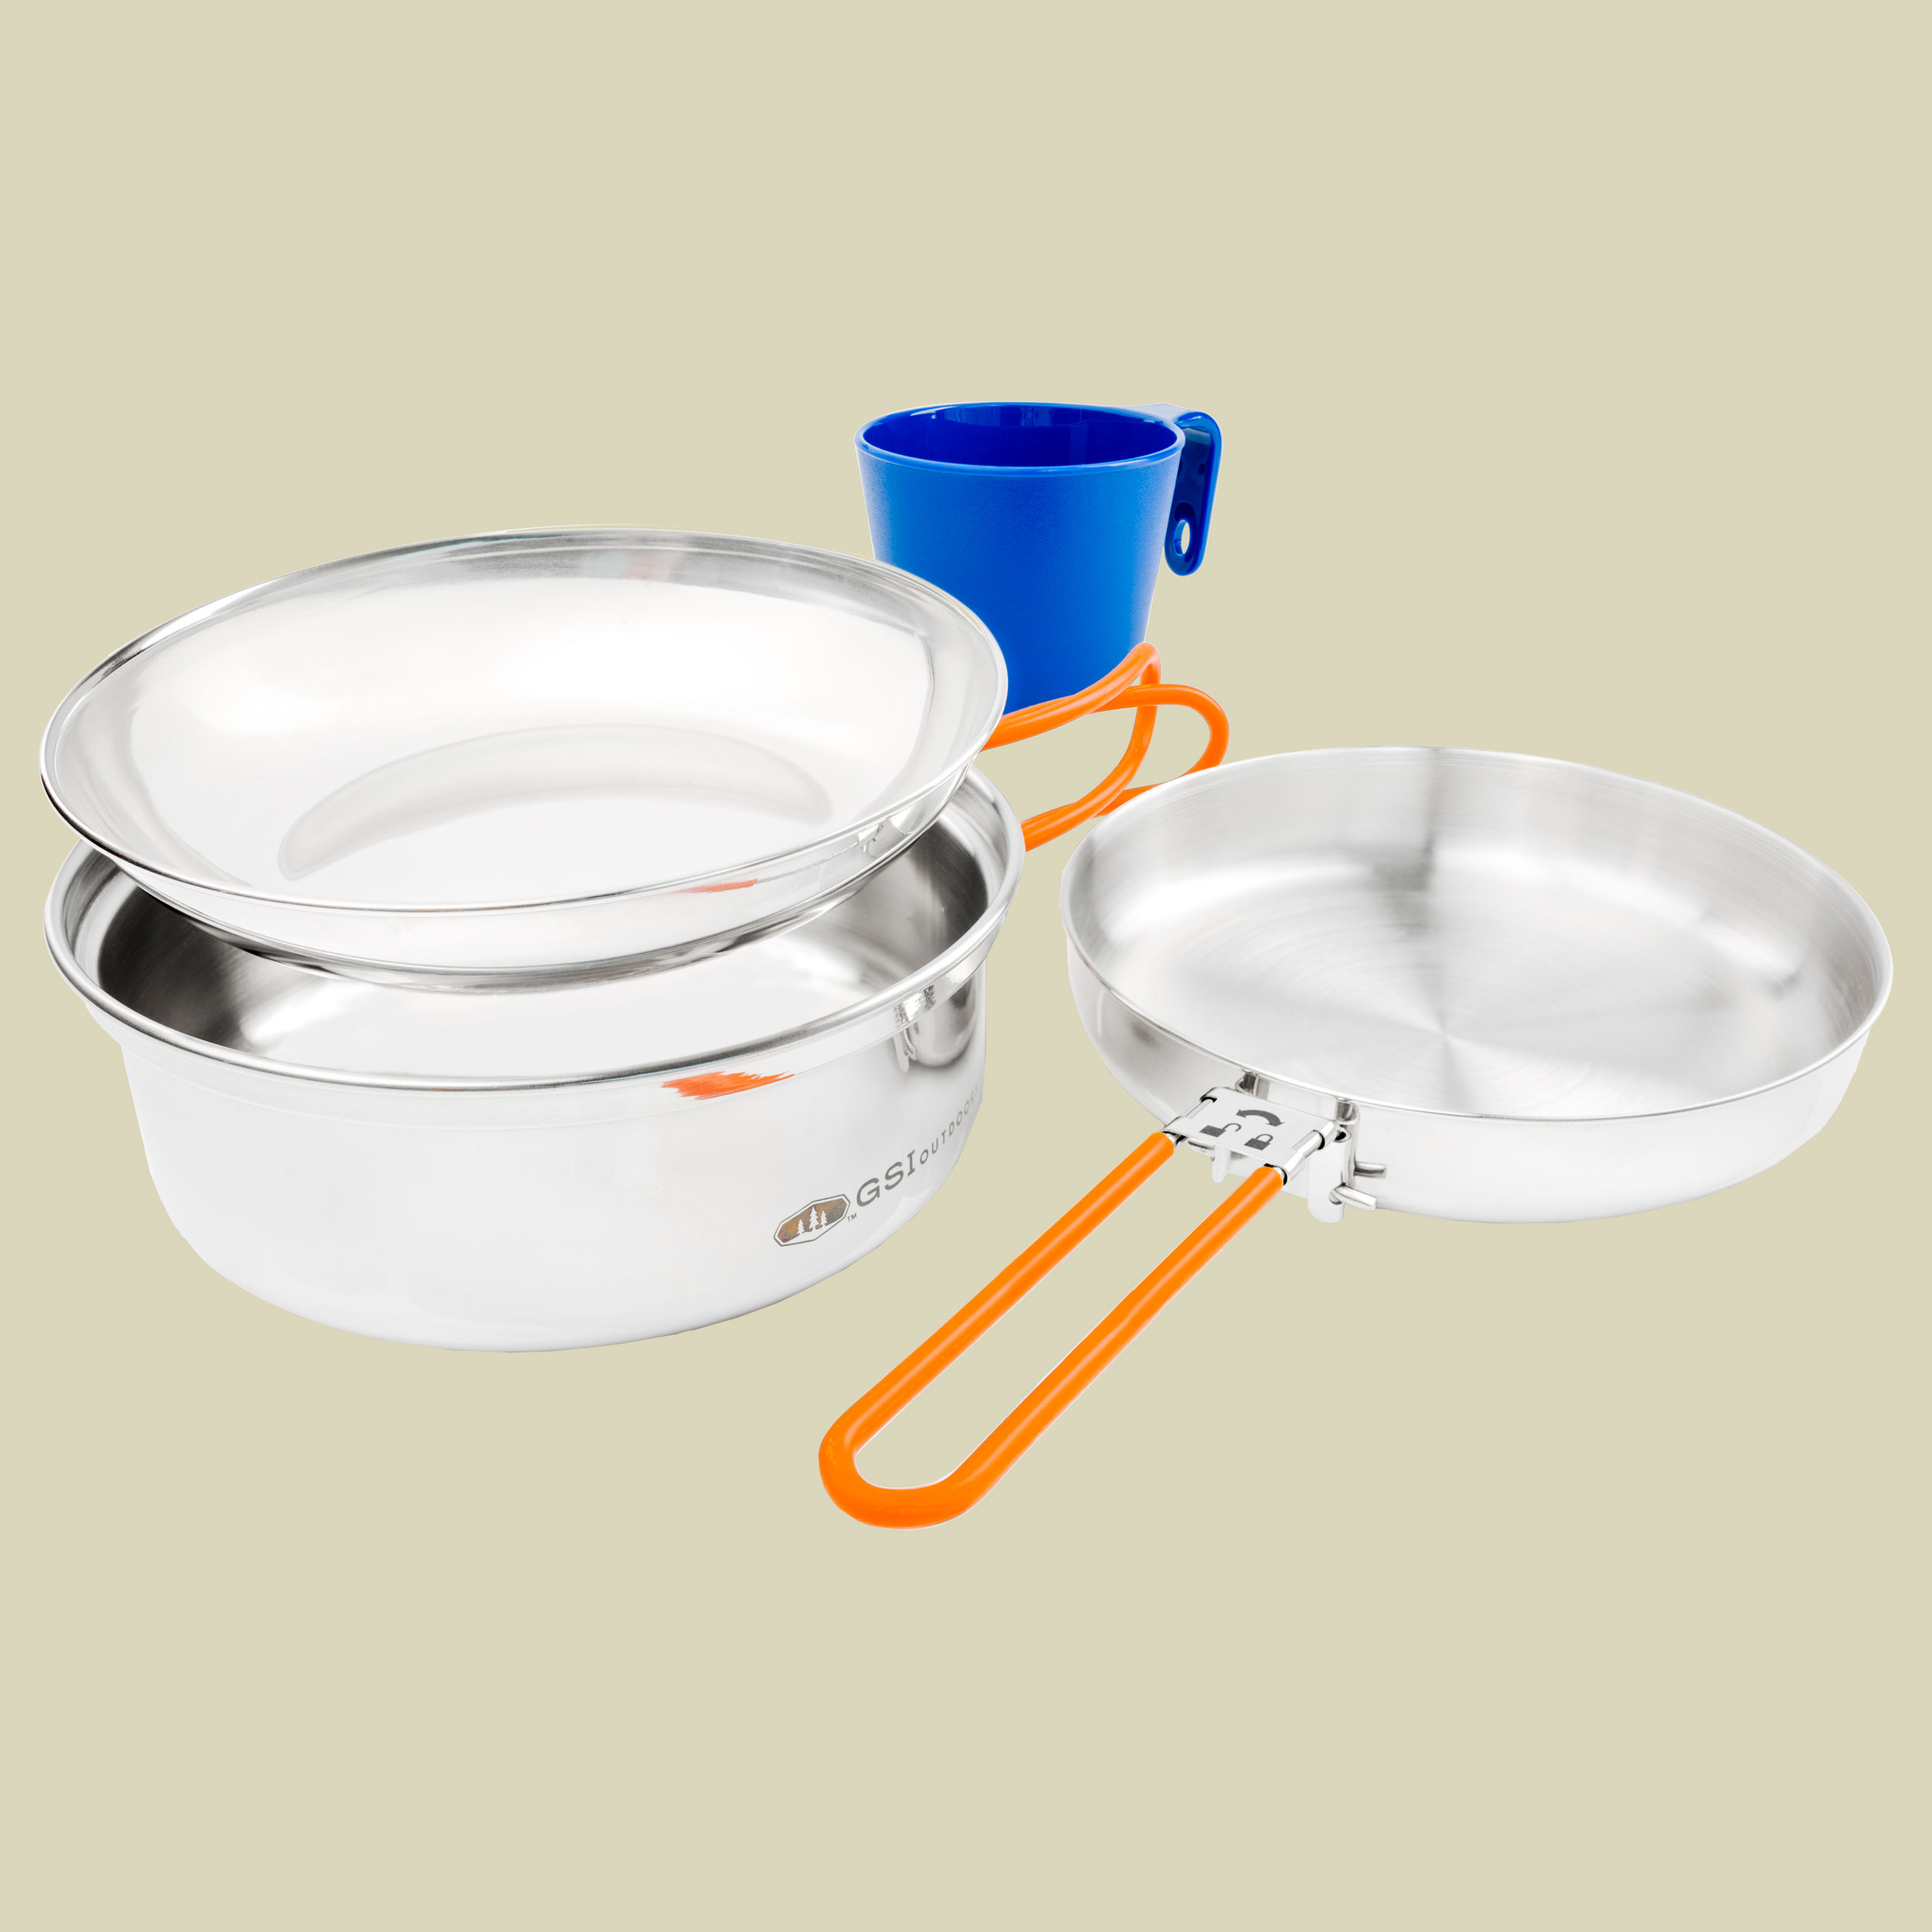 Glacier Stainless 1 Person Mess Kit